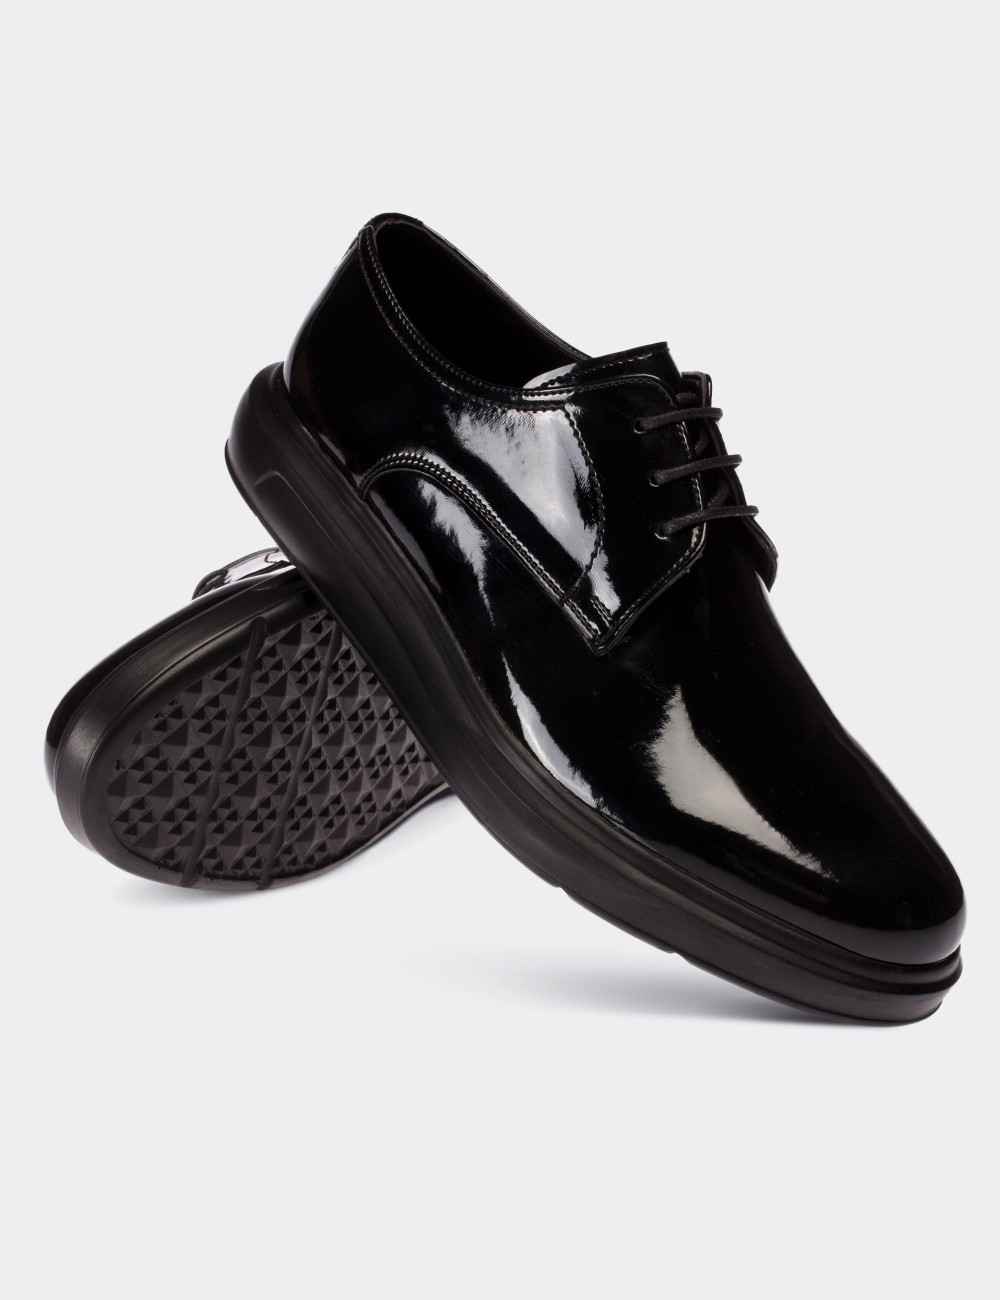 Black Patent Leather Lace-up Shoes - 00479MSYHP01